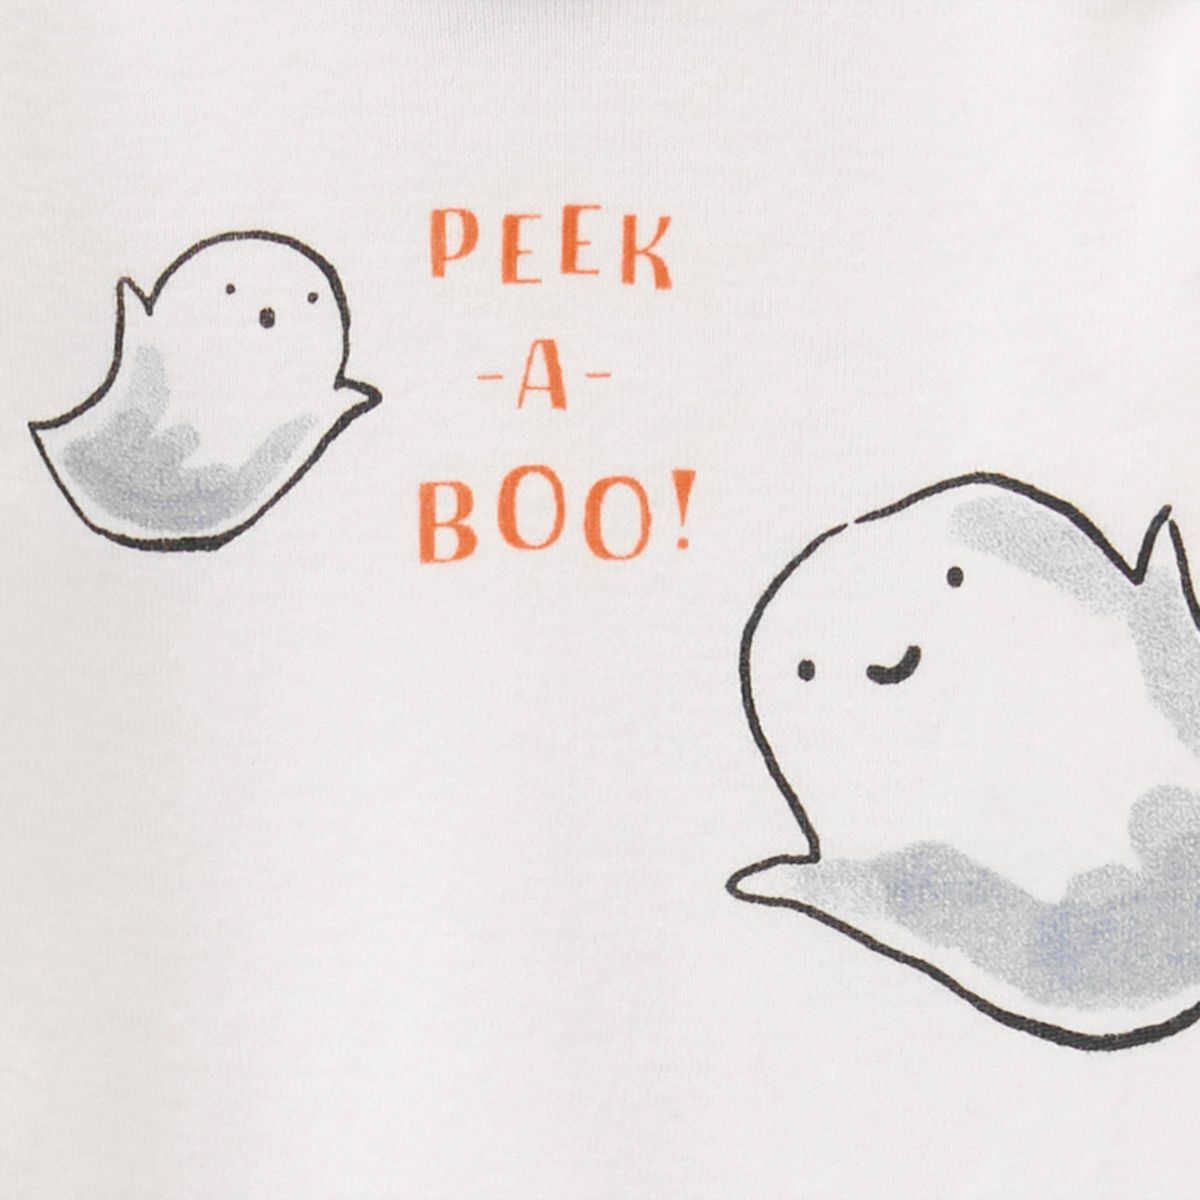 Carter's Just One You® Baby 'Peek-a-Boo' Halloween Top and Bottom Set - Gray/White | Target